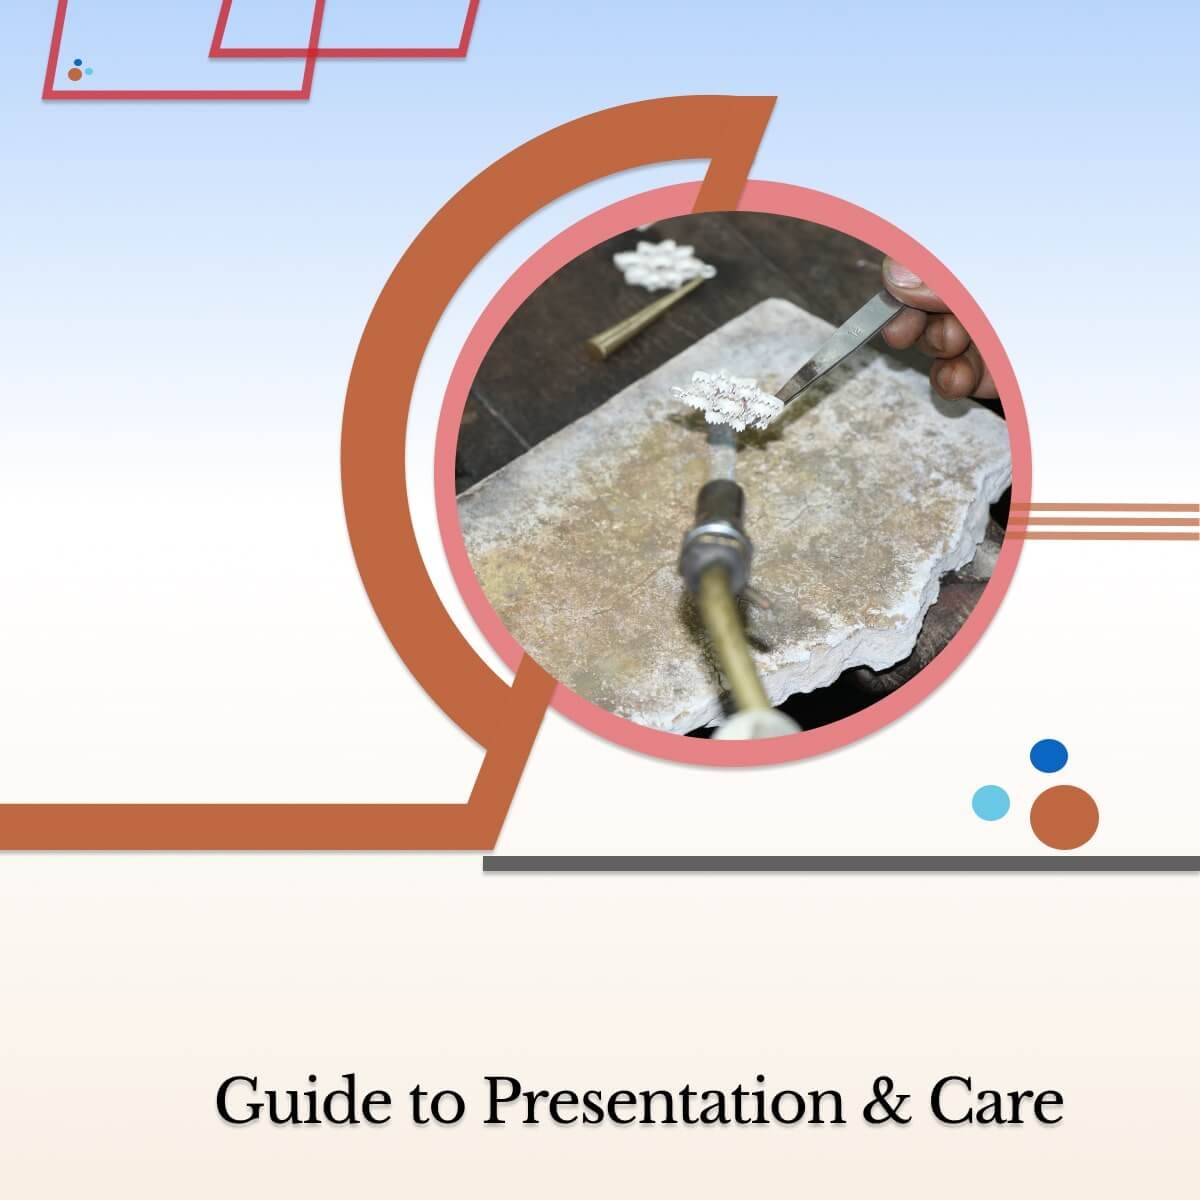 Presentation and Care Instructions